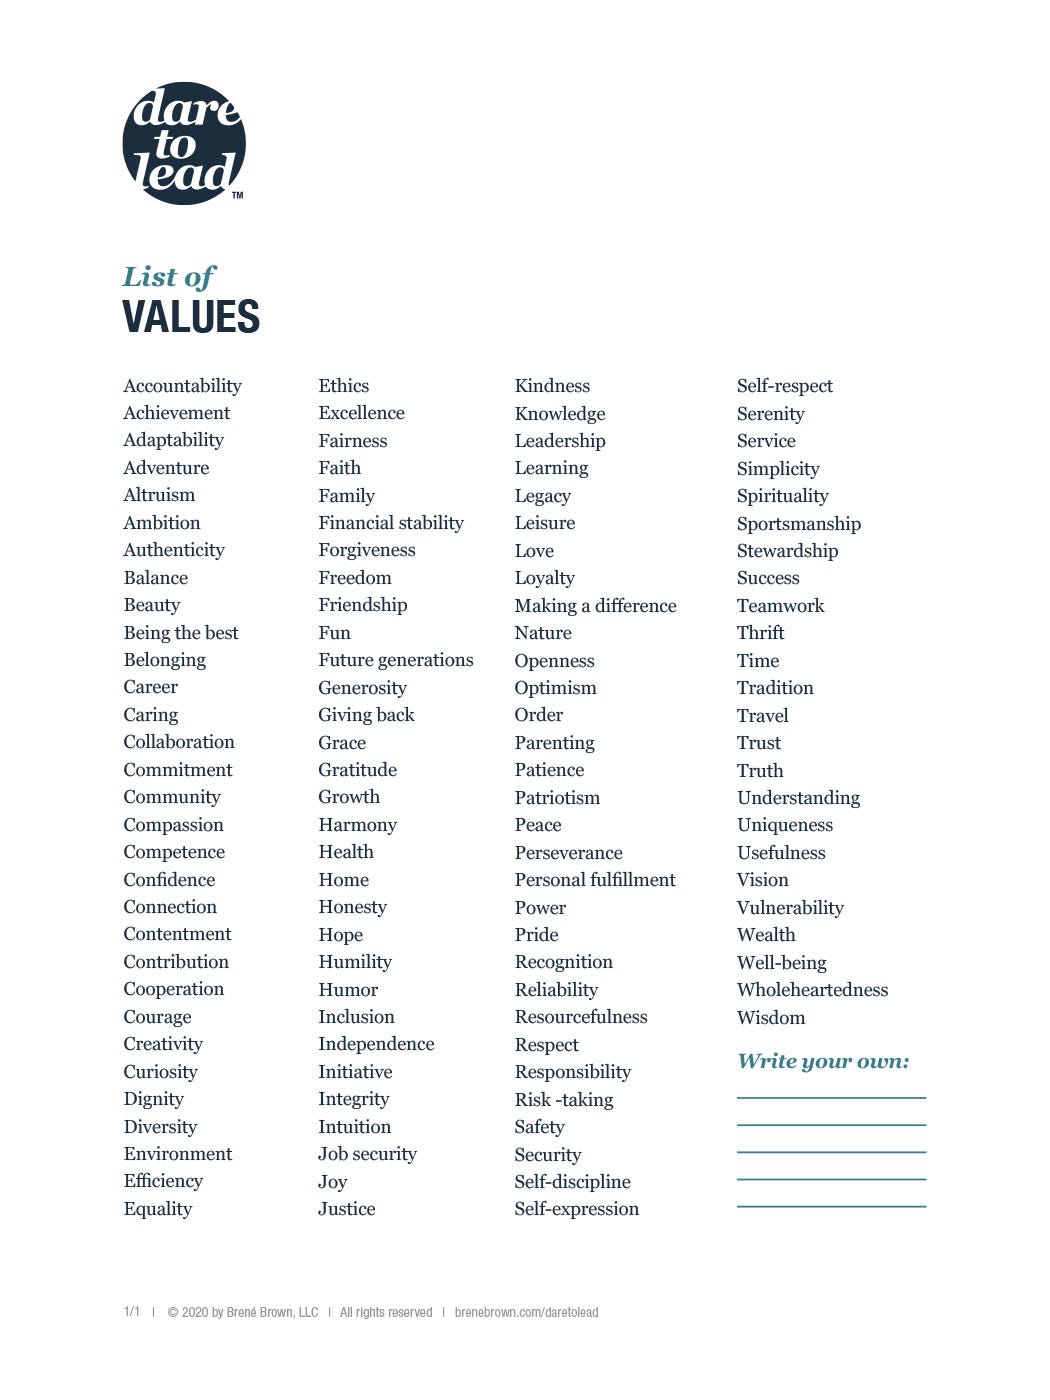 Dare to Lead | List of Values - Brené Brown